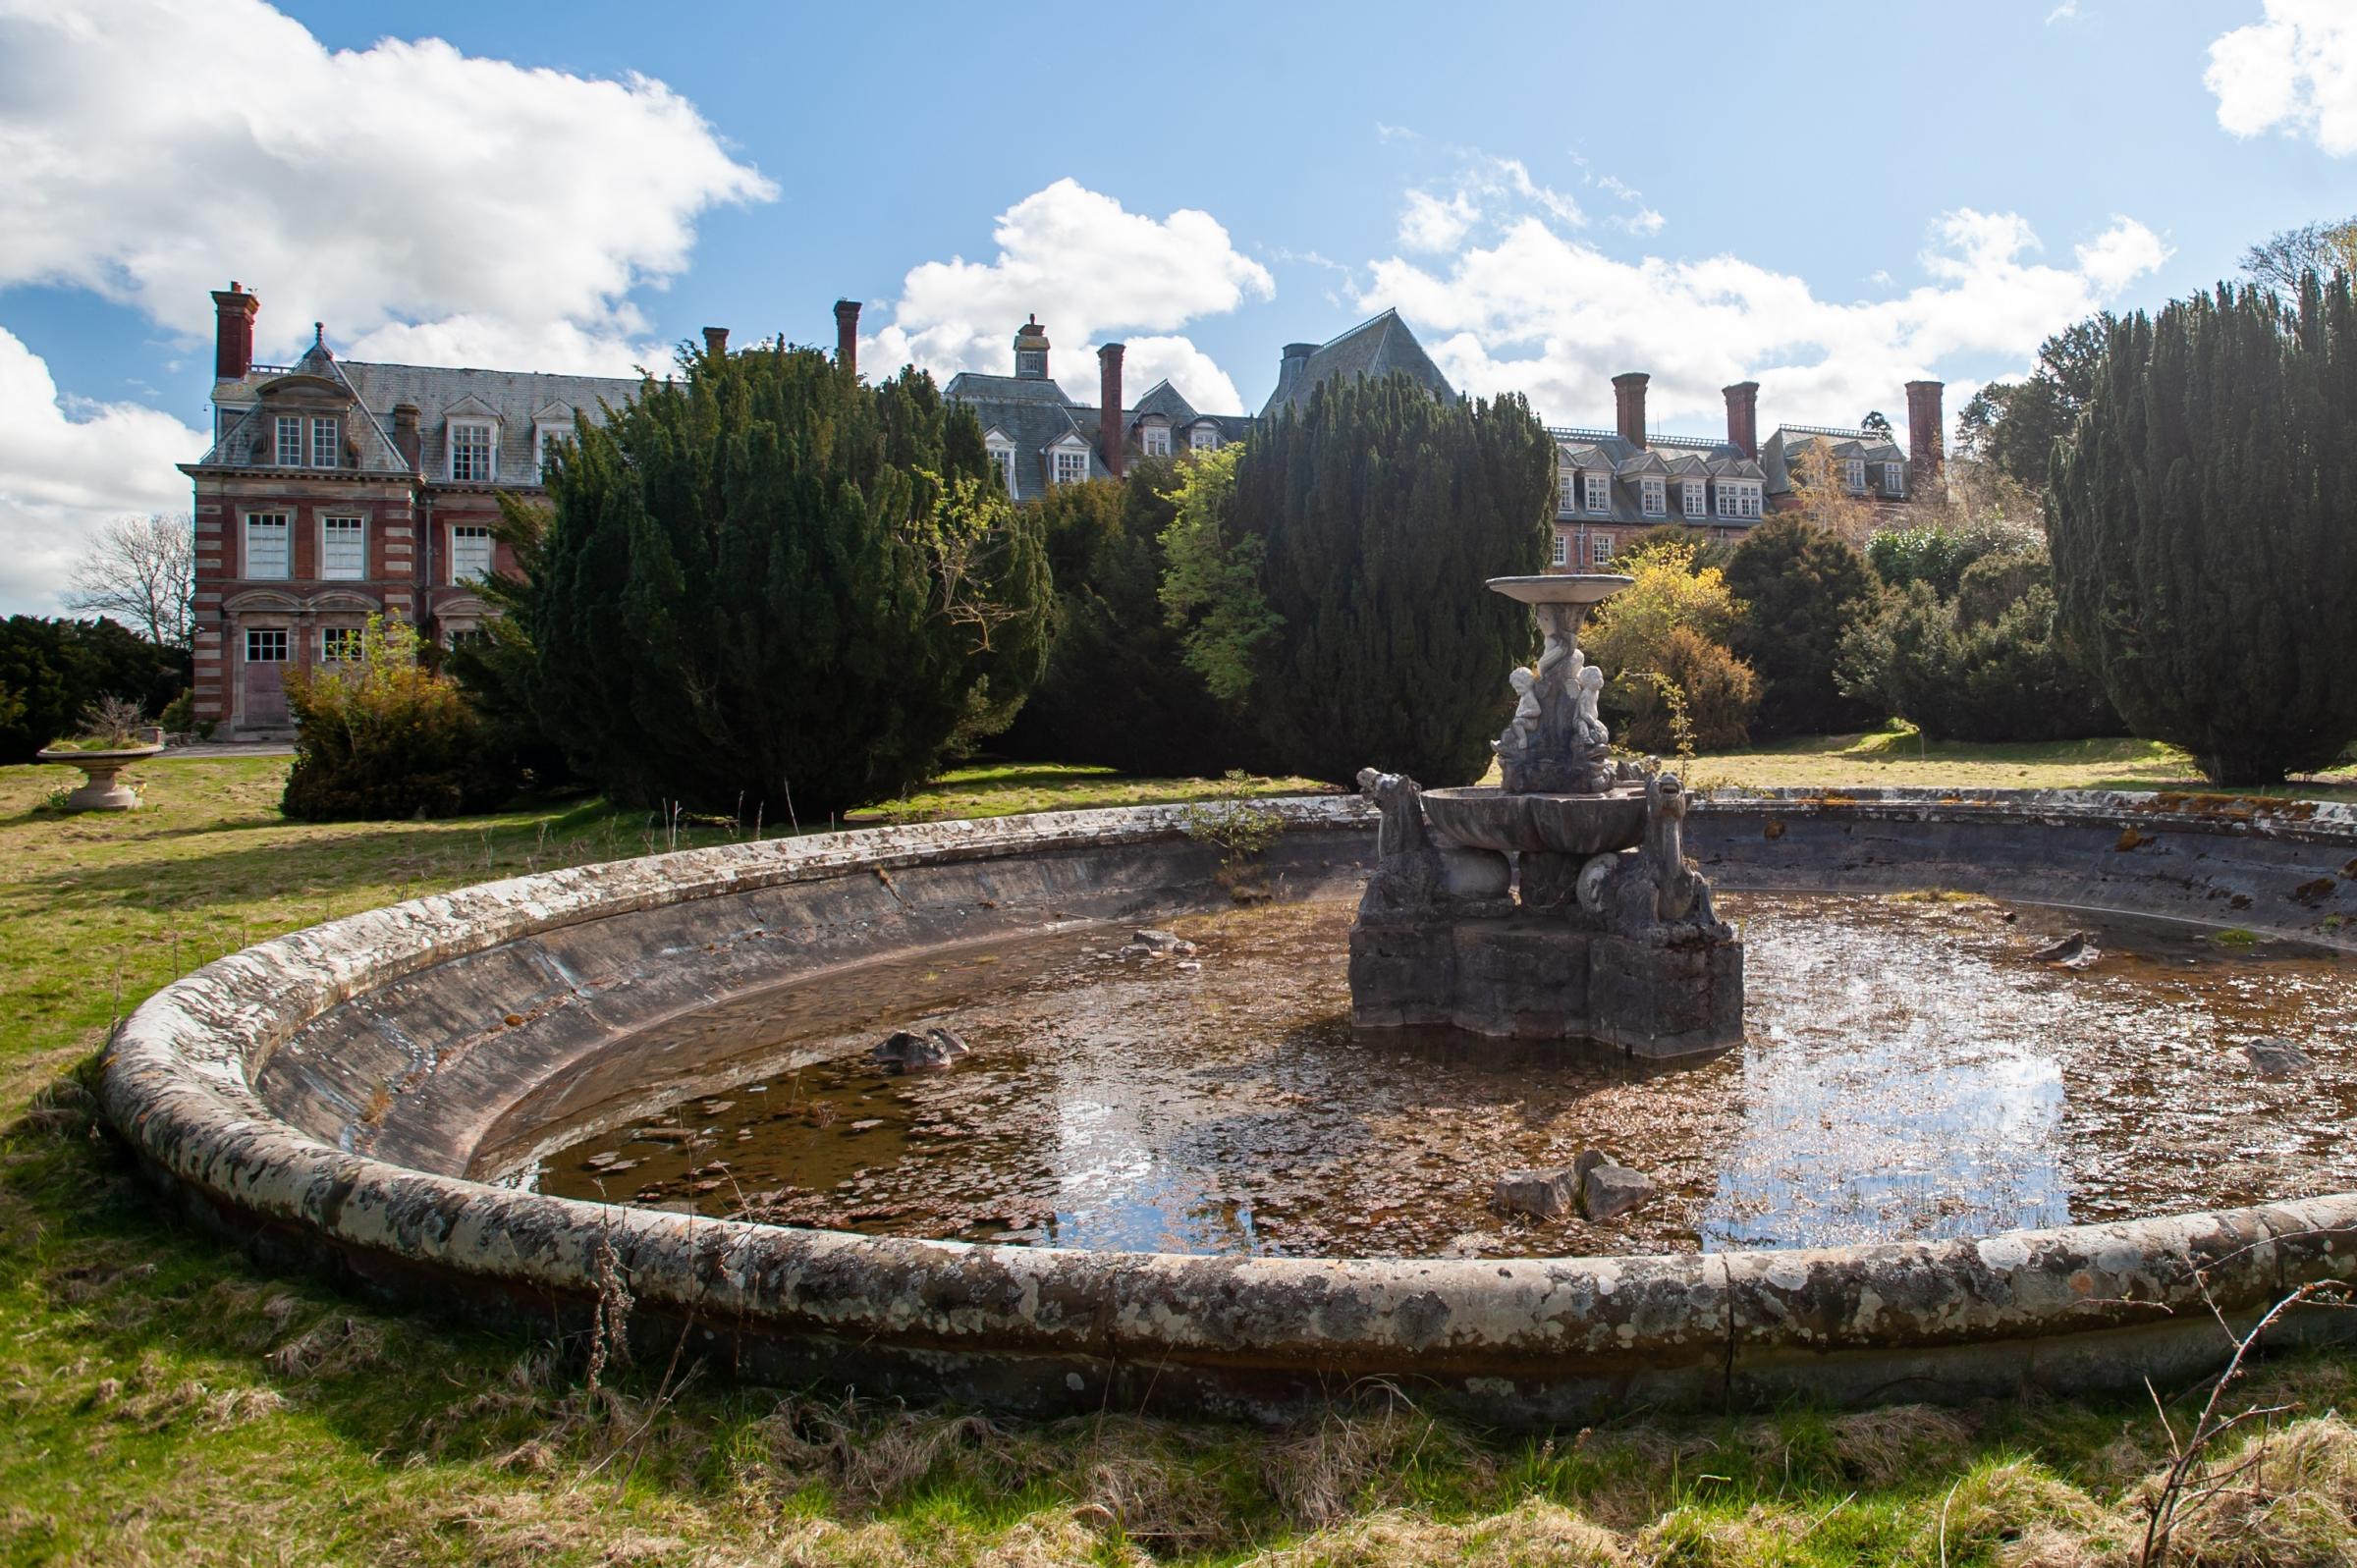 Externally, there are garden areas which include the remains of a large circular ornamental fountain, a tennis court and part of a sunken service driveway. Picture: Permission granted for use by Allsop